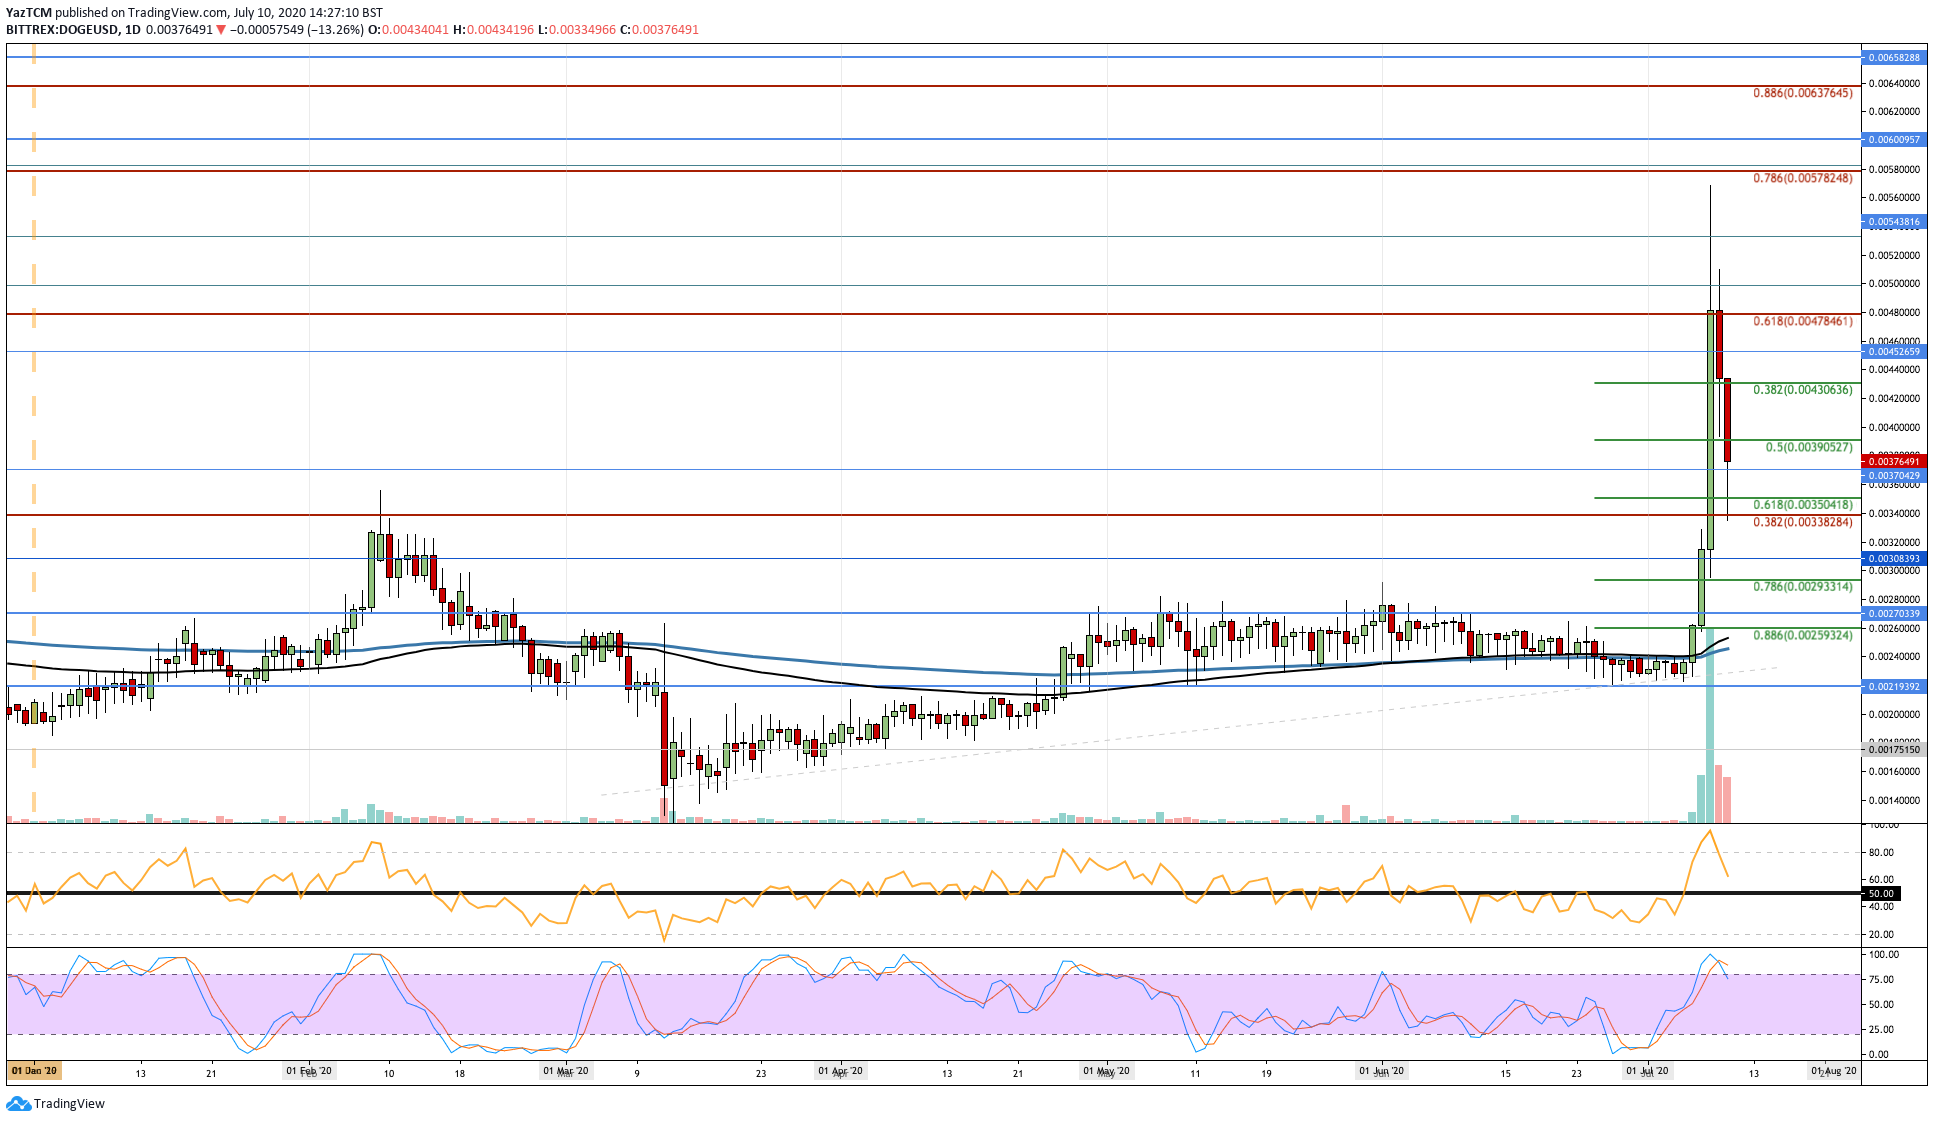 Crypto Price Analysis & Overview July 10: Bitcoin, Ethereum, Ripple, Cardano,and Doge